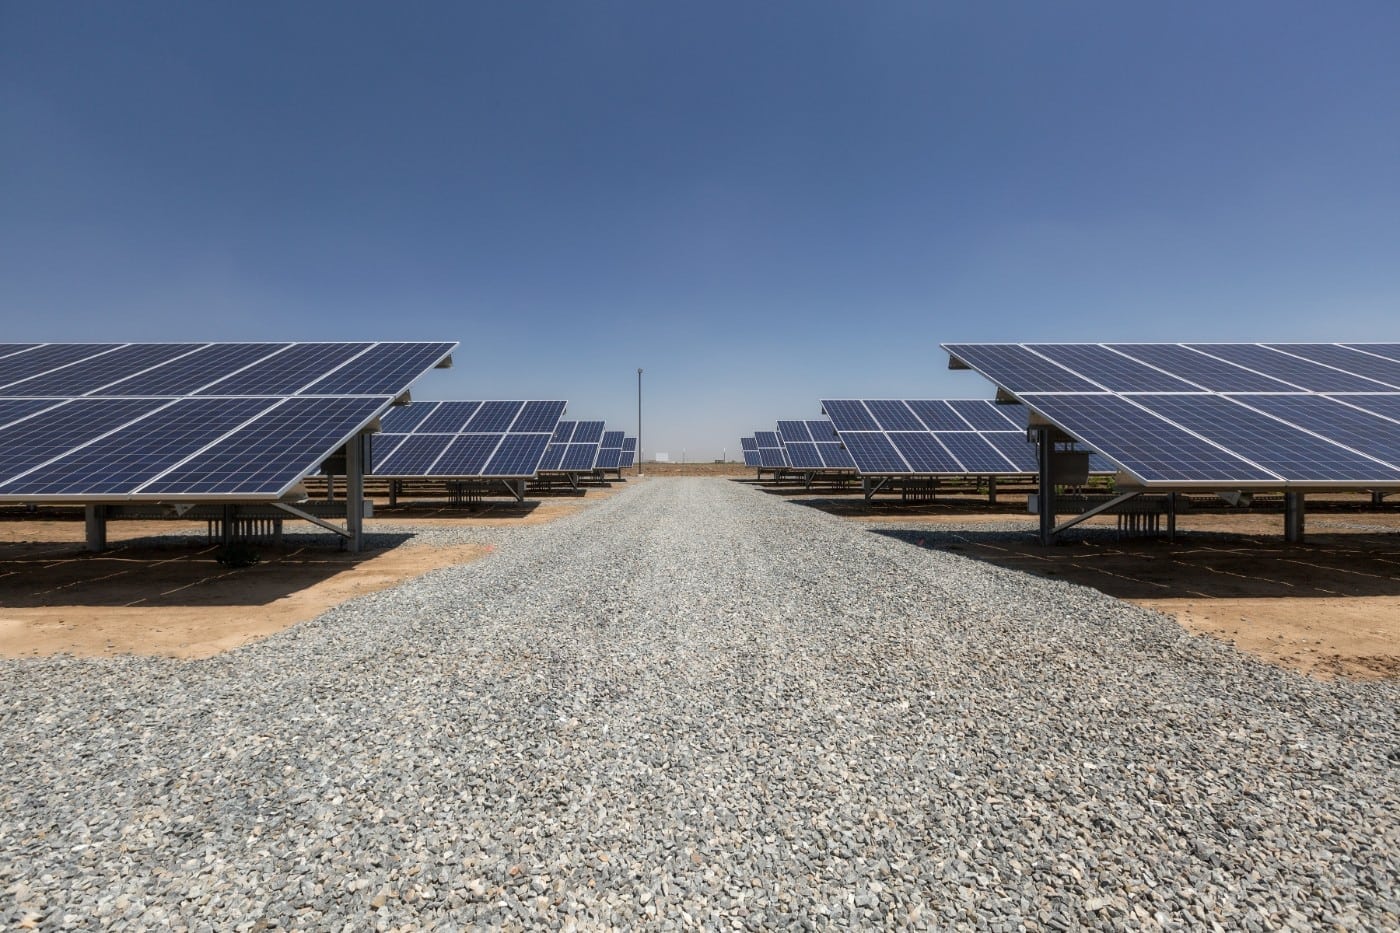 Gravel path between two long rows of ground-mounted solar panels and blue sky at the Joe Simoes dairy farm in Tipton, California.